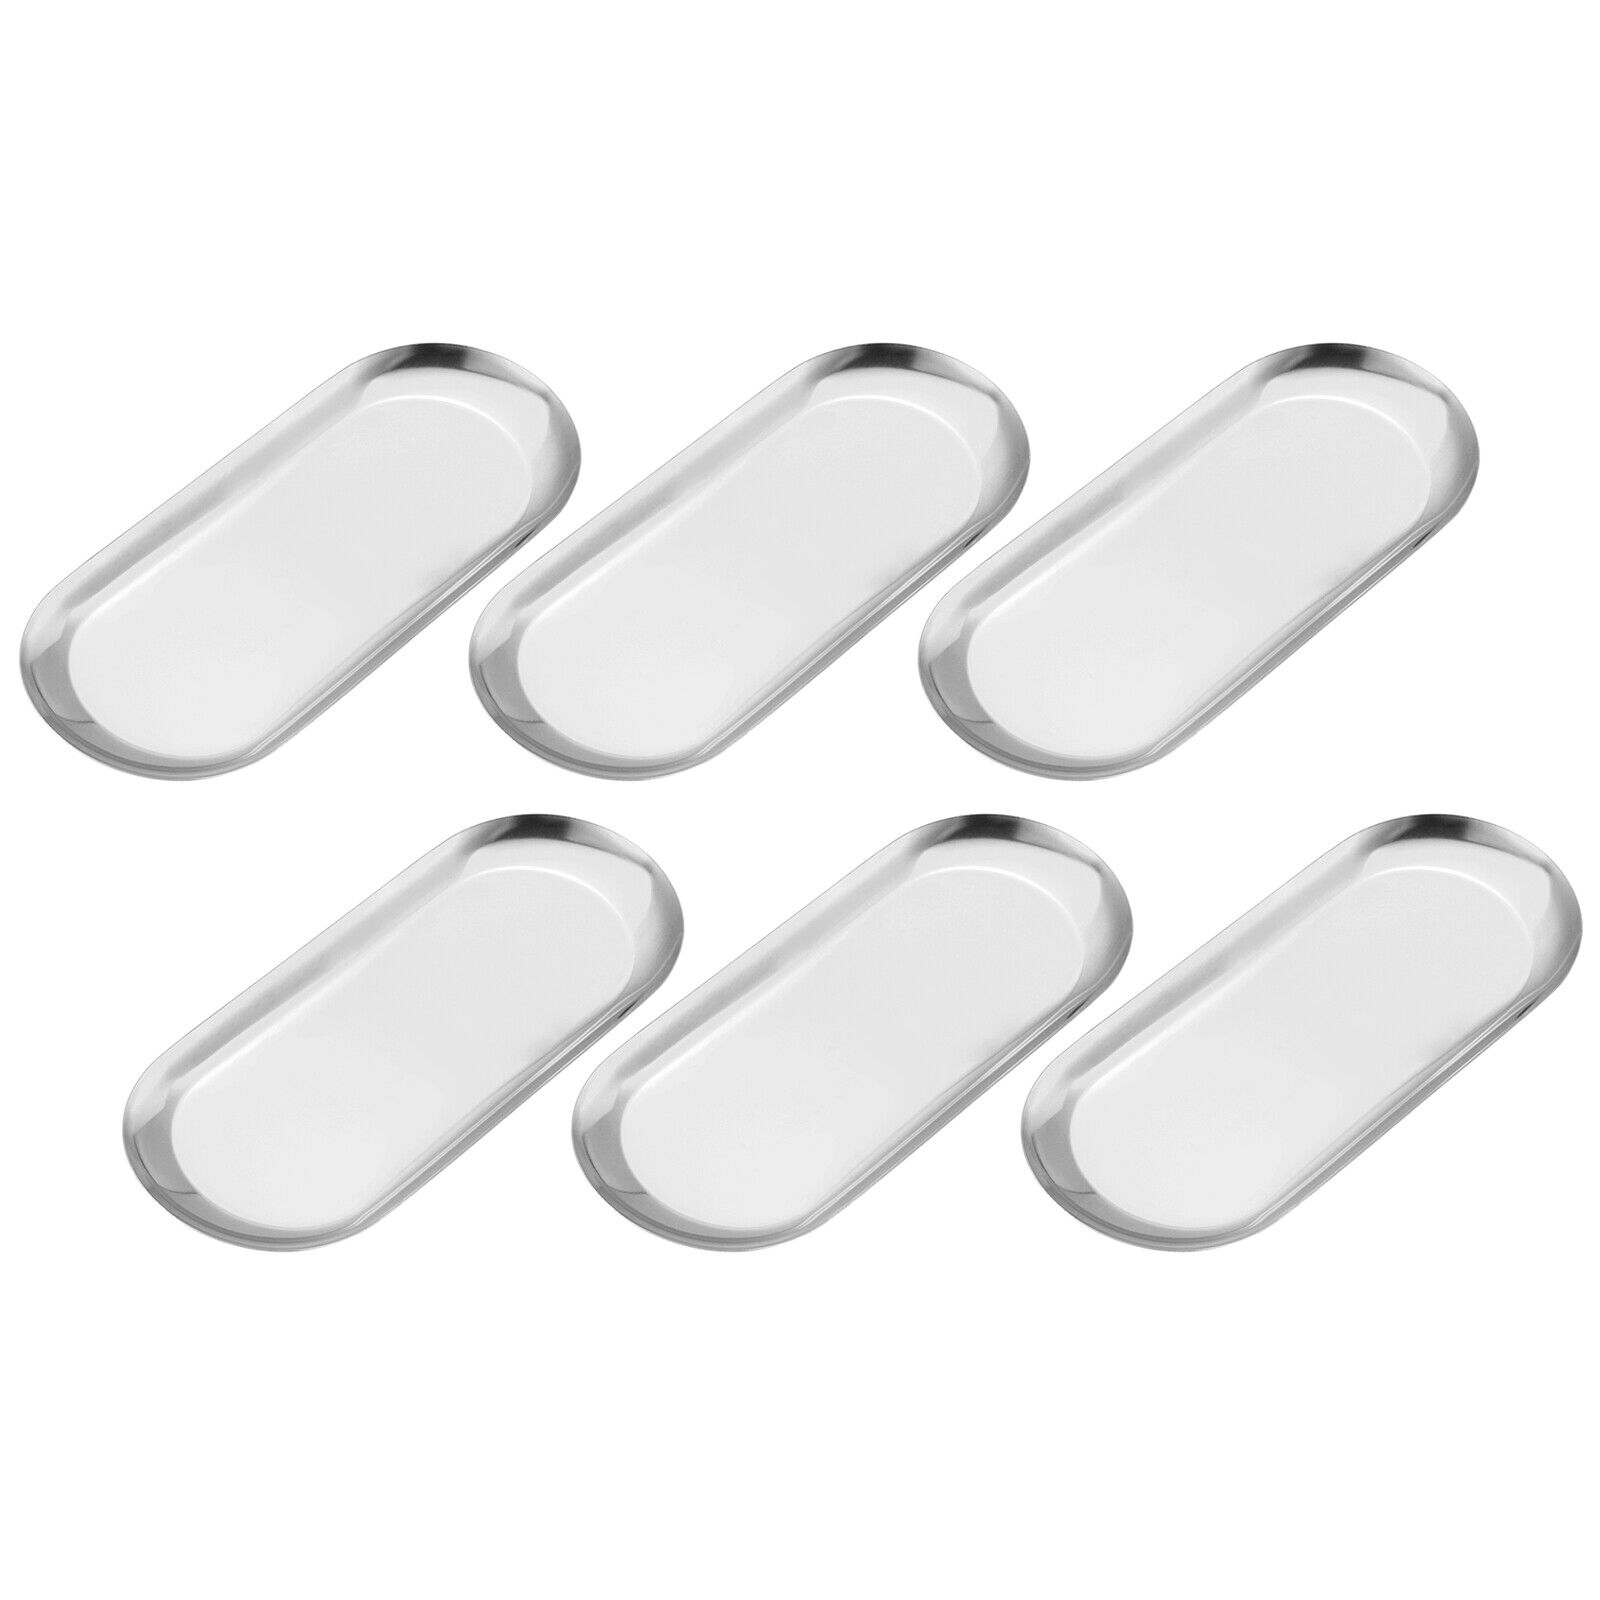 6pcs Stainless Steel Decorative Trays Silver Bathroom Cosmetic Trays (9 Inch)